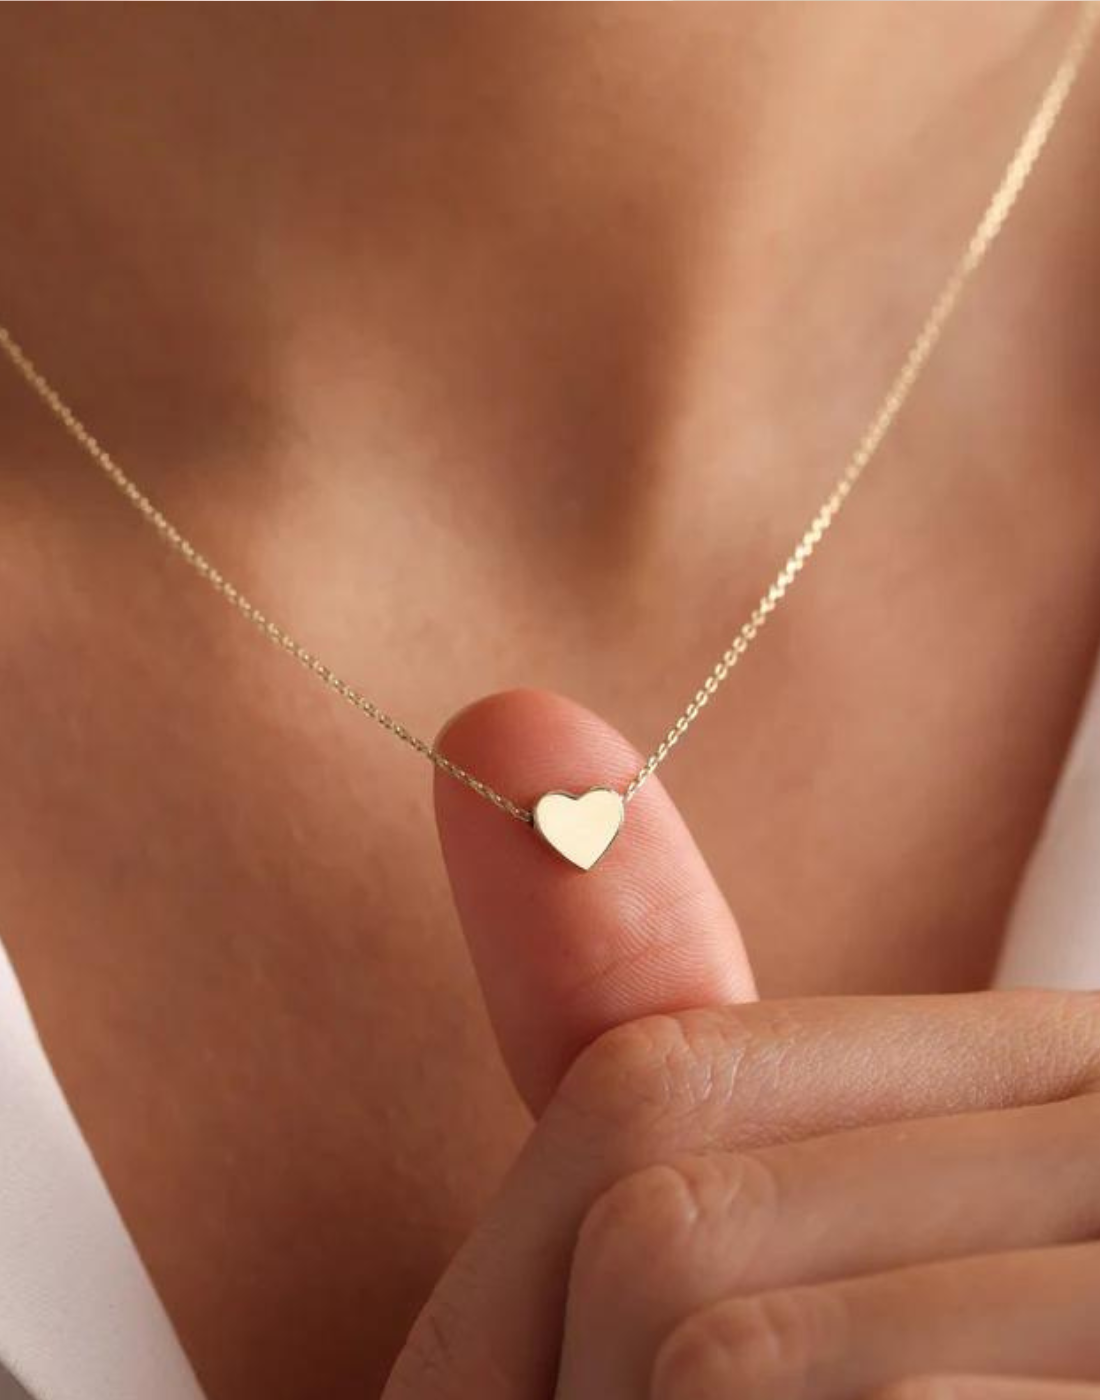 Delicate Heart Pendant Necklace with gold plated in Pakistan for specially university student